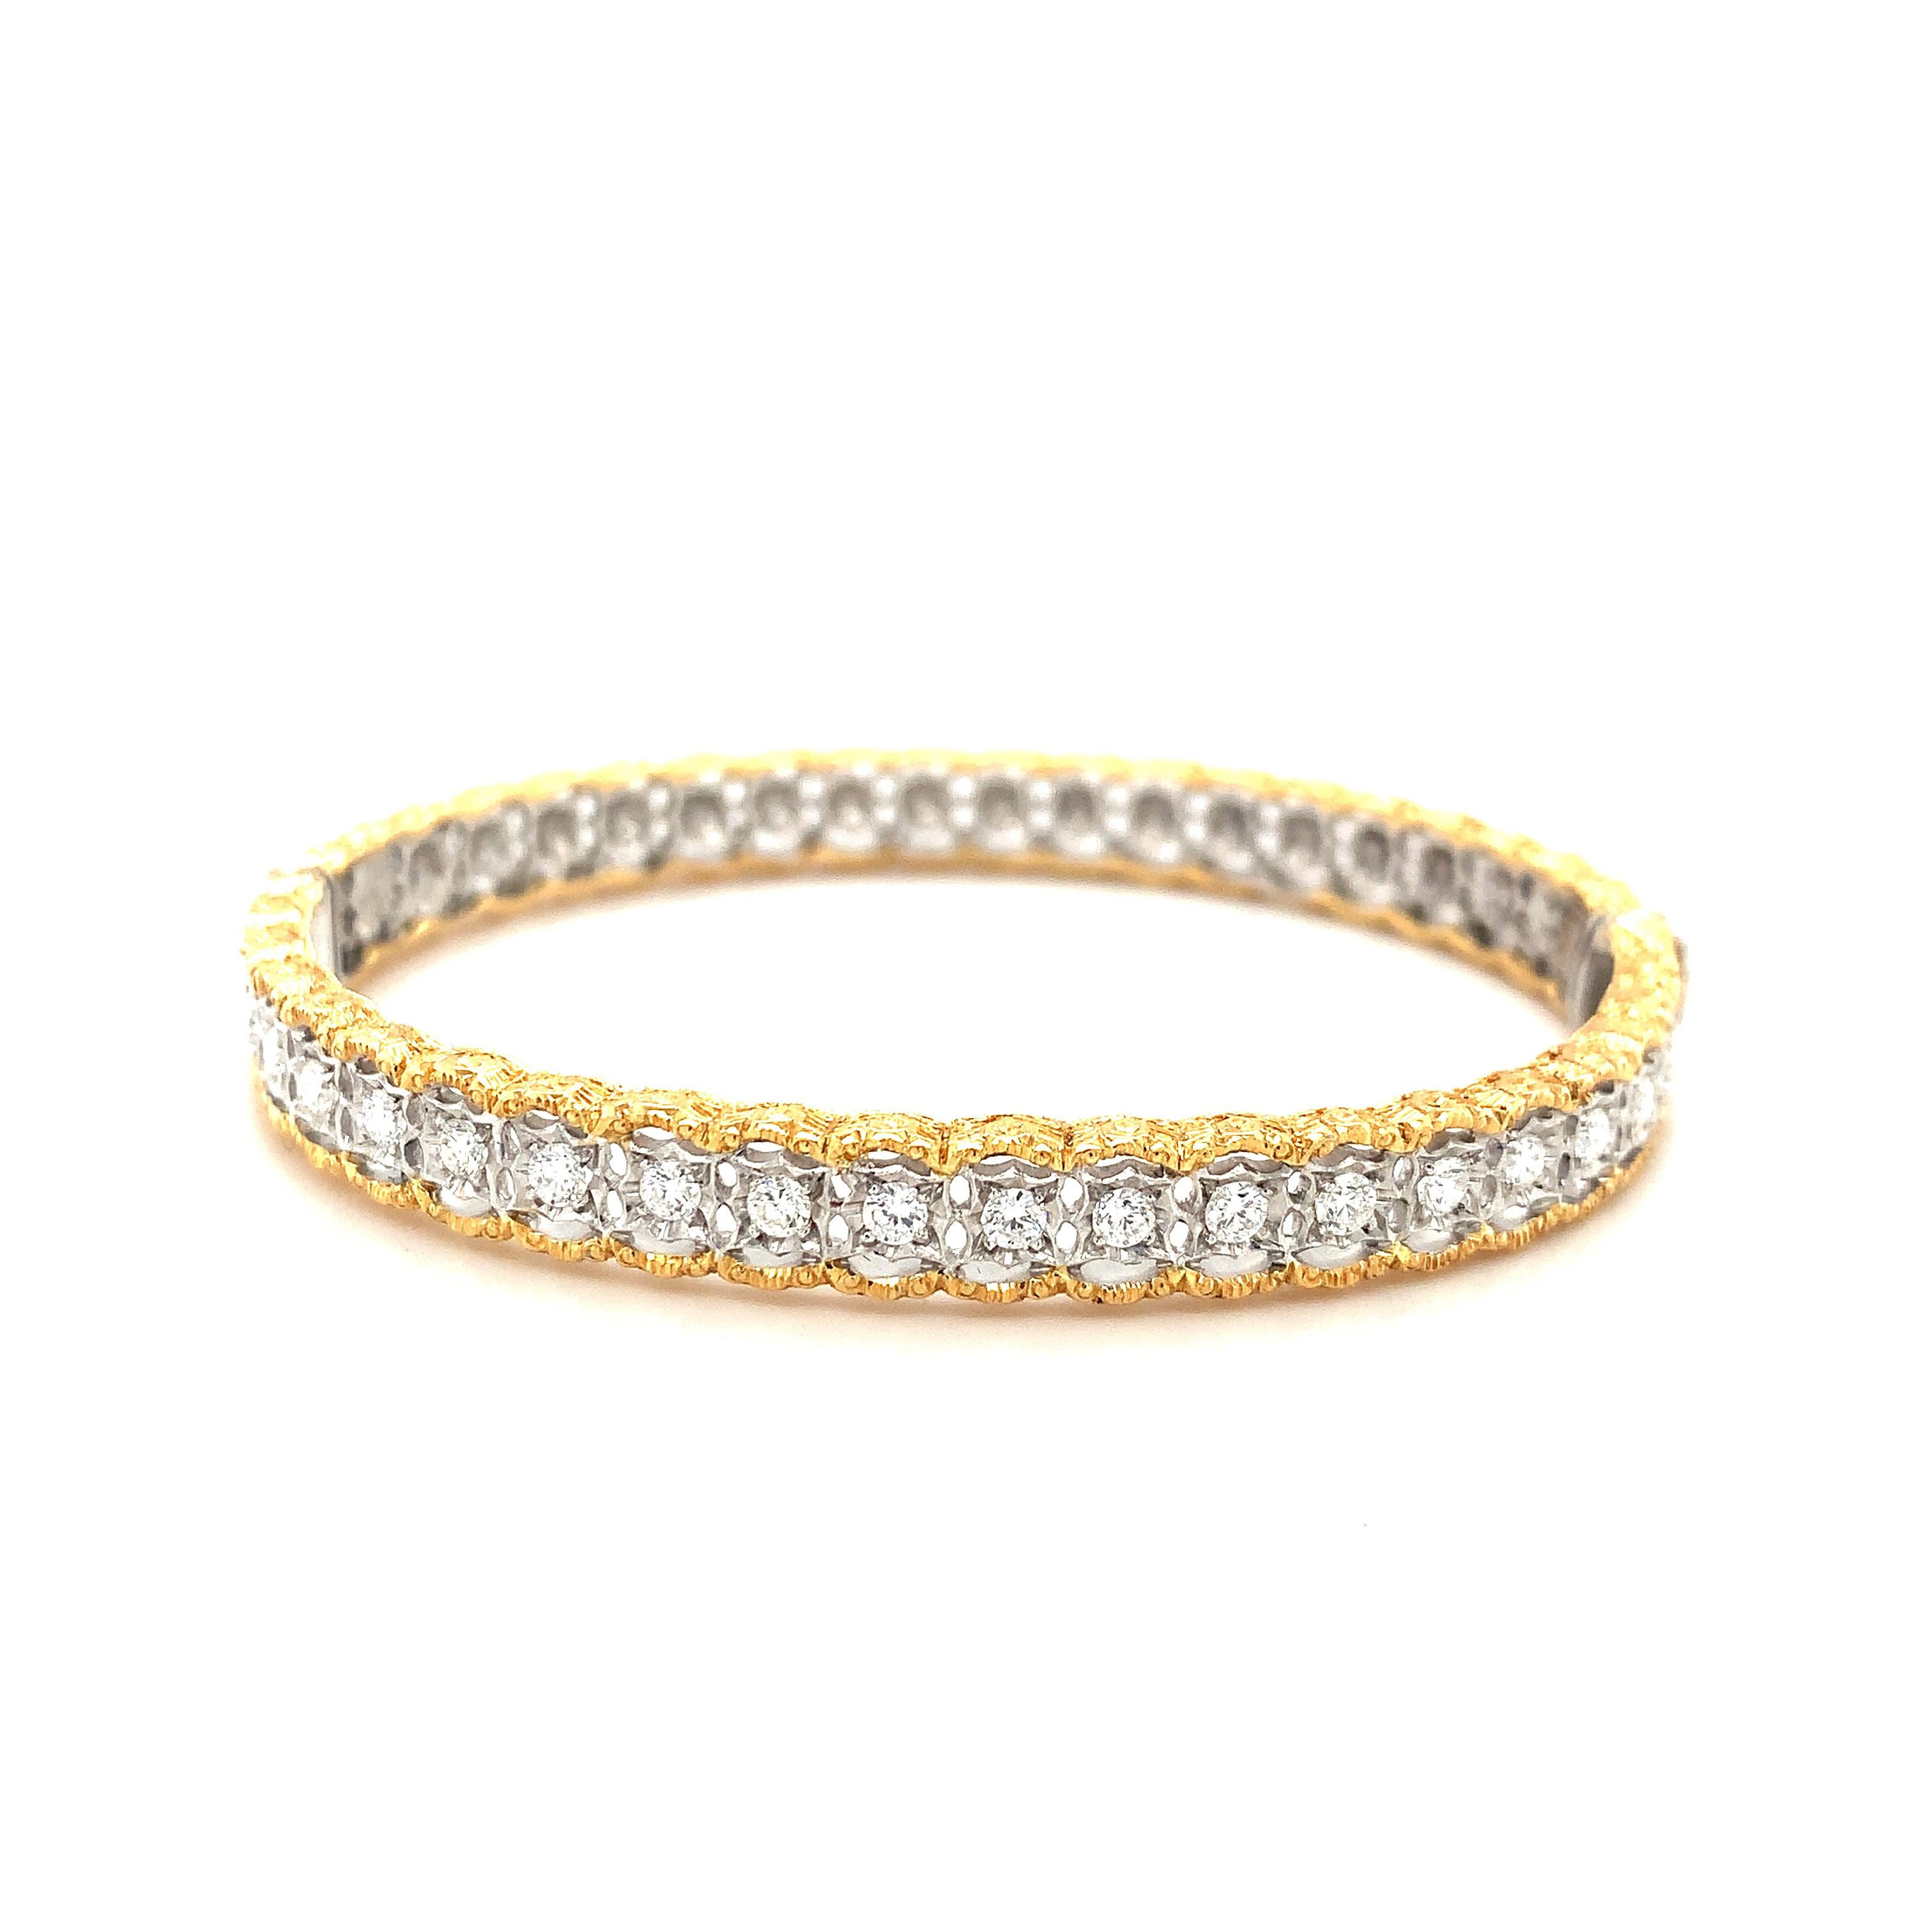 This stunning Florentine style, yellow and white gold bangle bracelet was handcrafted in Italy and is set with a carat of diamonds. The center of the bangle is 18k white gold that has been intricately pierced into individual settings that showcase